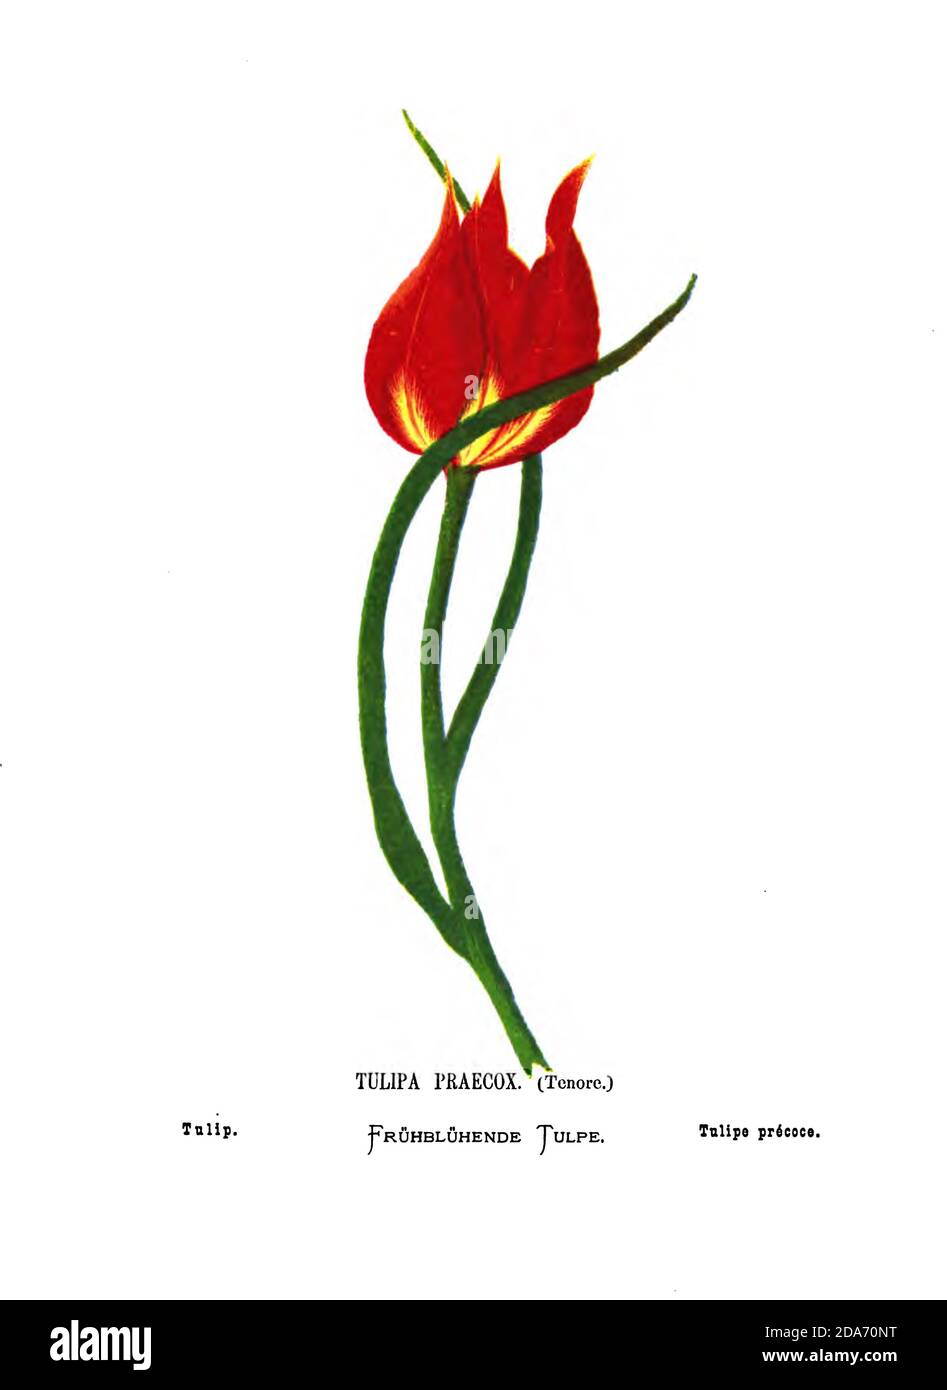 Tulip, Tulipa praecox [Probably Tulipa agenensis] From the book Wild flowers of the Holy Land: Fifty-Four Plates Printed In Colours, Drawn And Painted After Nature. by Mrs. Hannah Zeller, (Gobat); Tristram, H. B. (Henry Baker), and Edward Atkinson, Published in London by James Nisbet & Co 1876 on white background Stock Photo